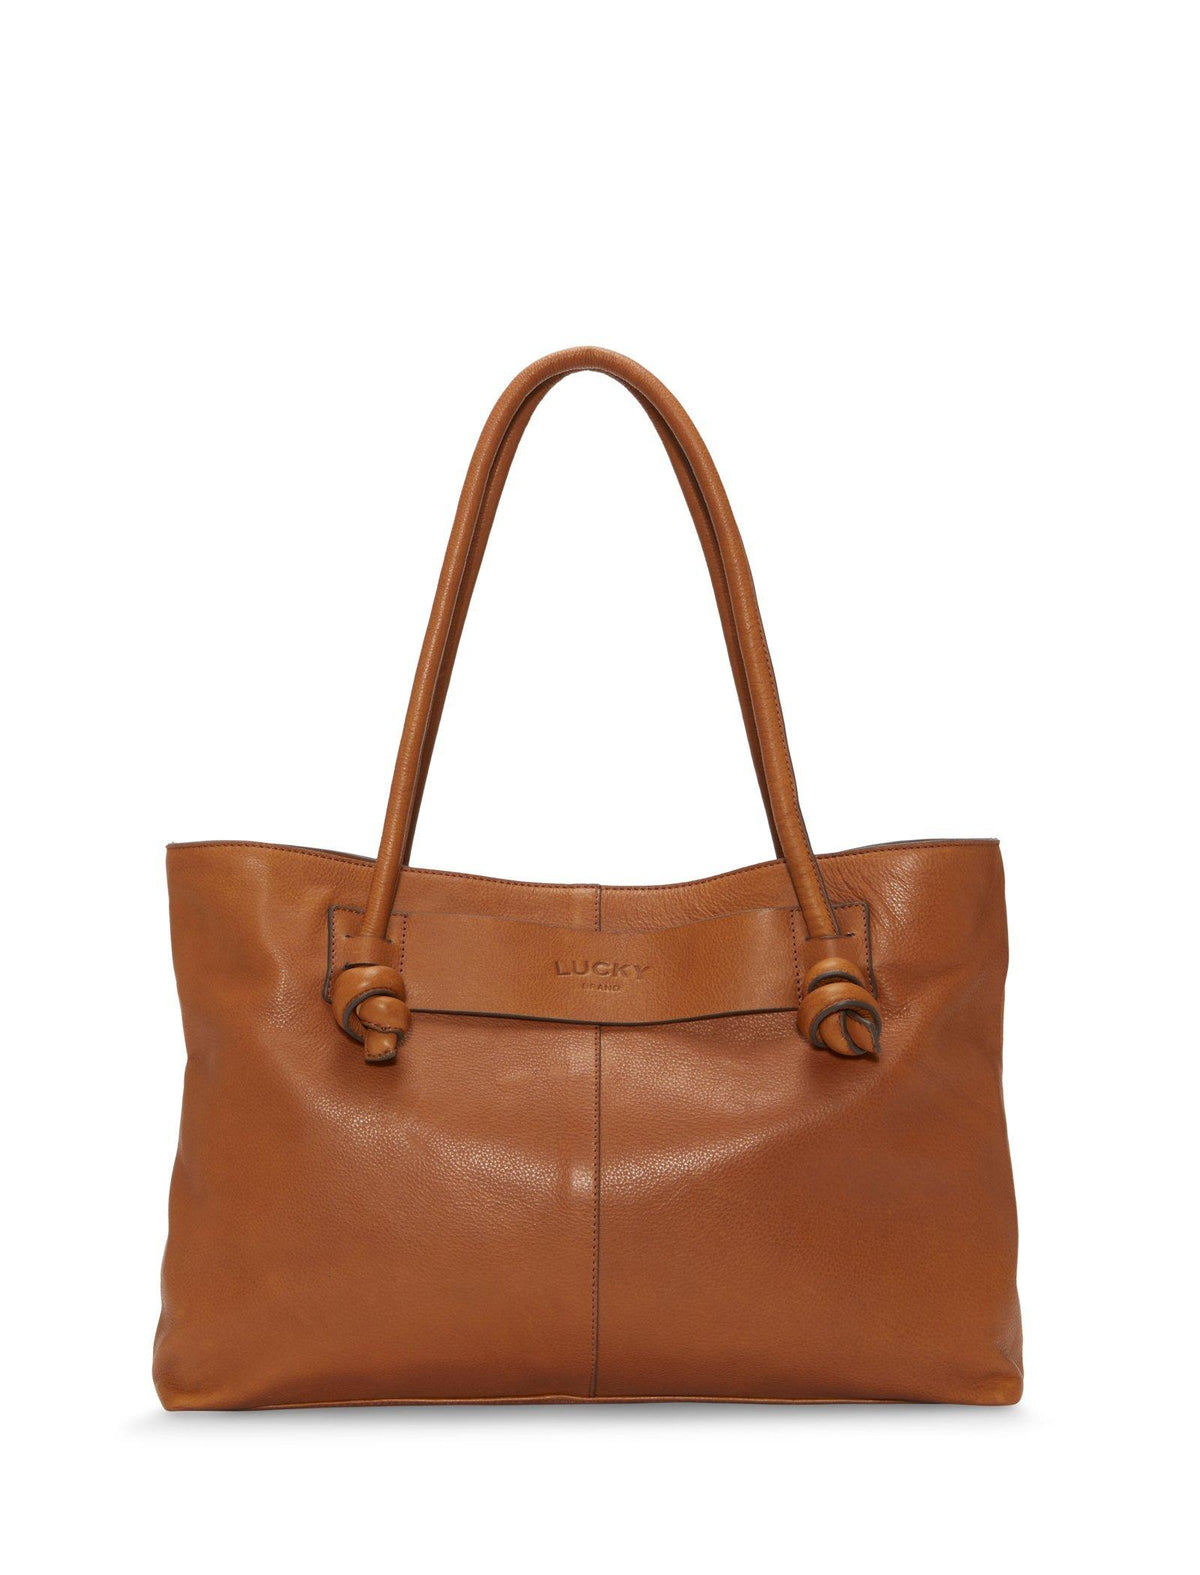 Lucky Brand Juli Leather Tote - Women's Accessories Bags Handbags Totes Dark Brown